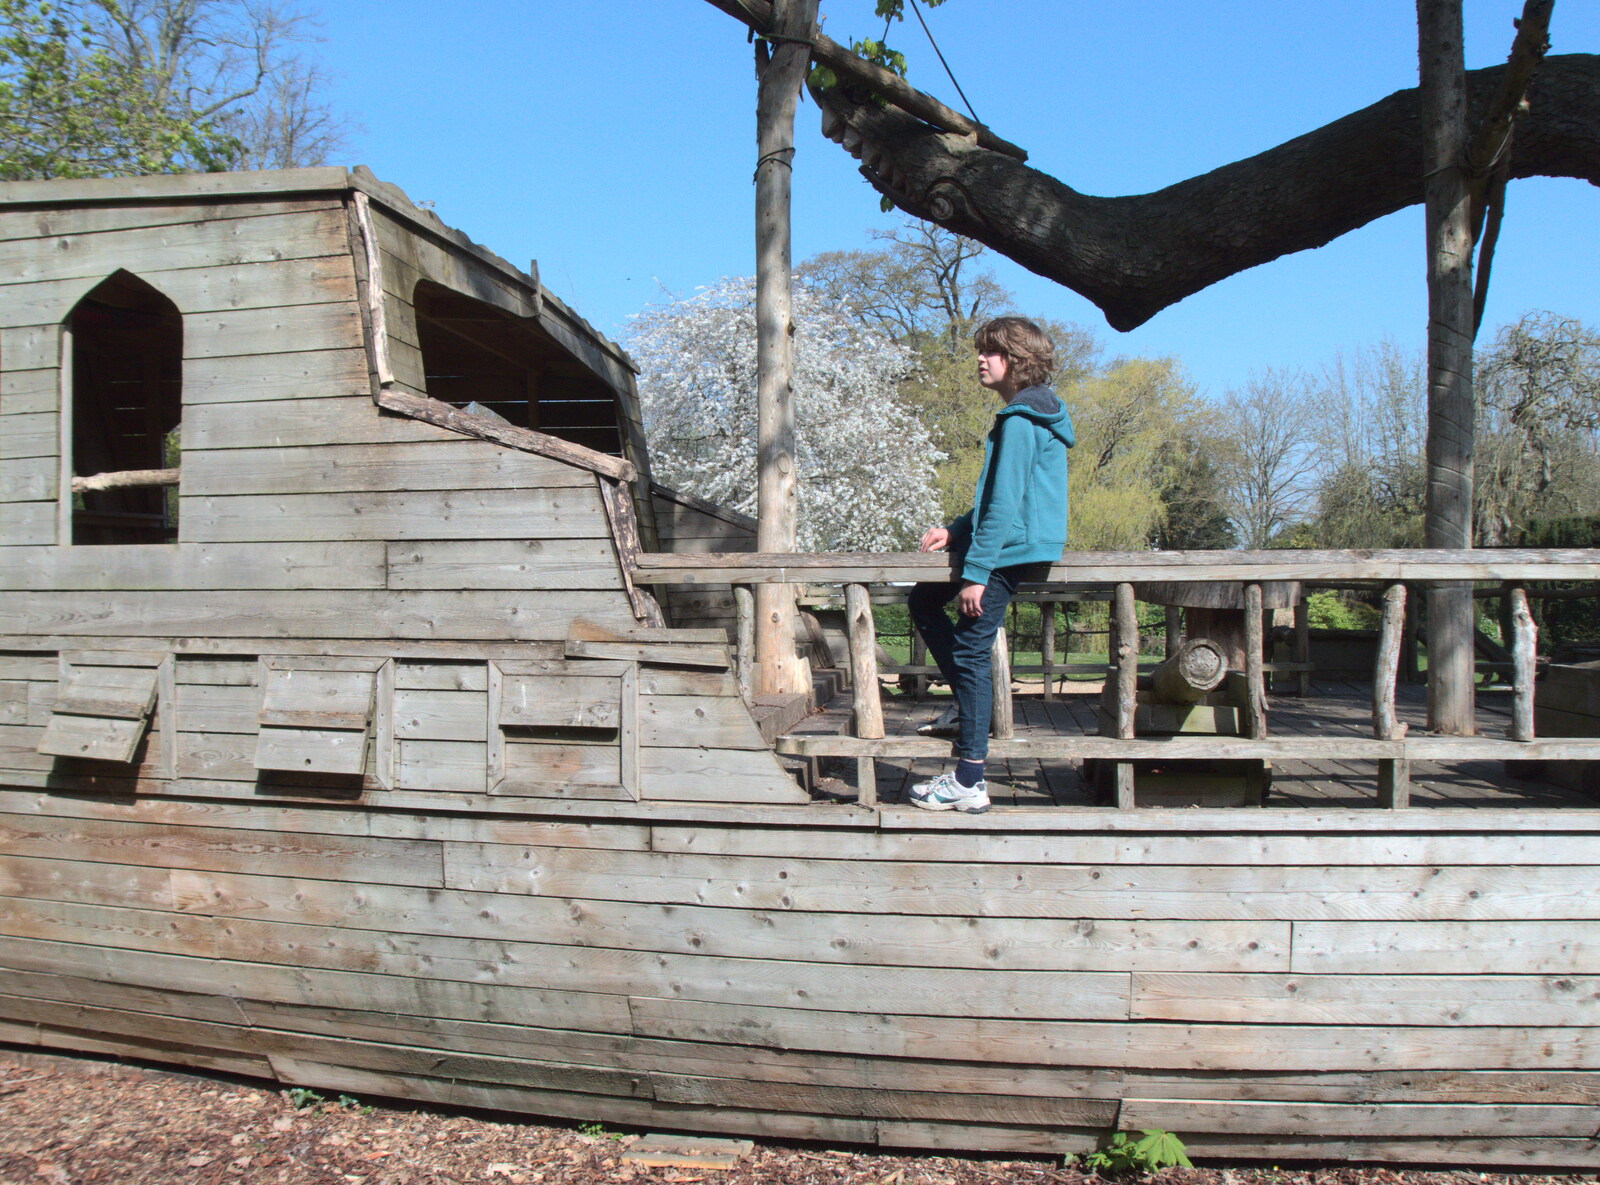 Fred sits on the empty pirate ship from The Lockdown Desertion of Diss, and a Bike Ride up the Avenue, Brome - 19th April 2020